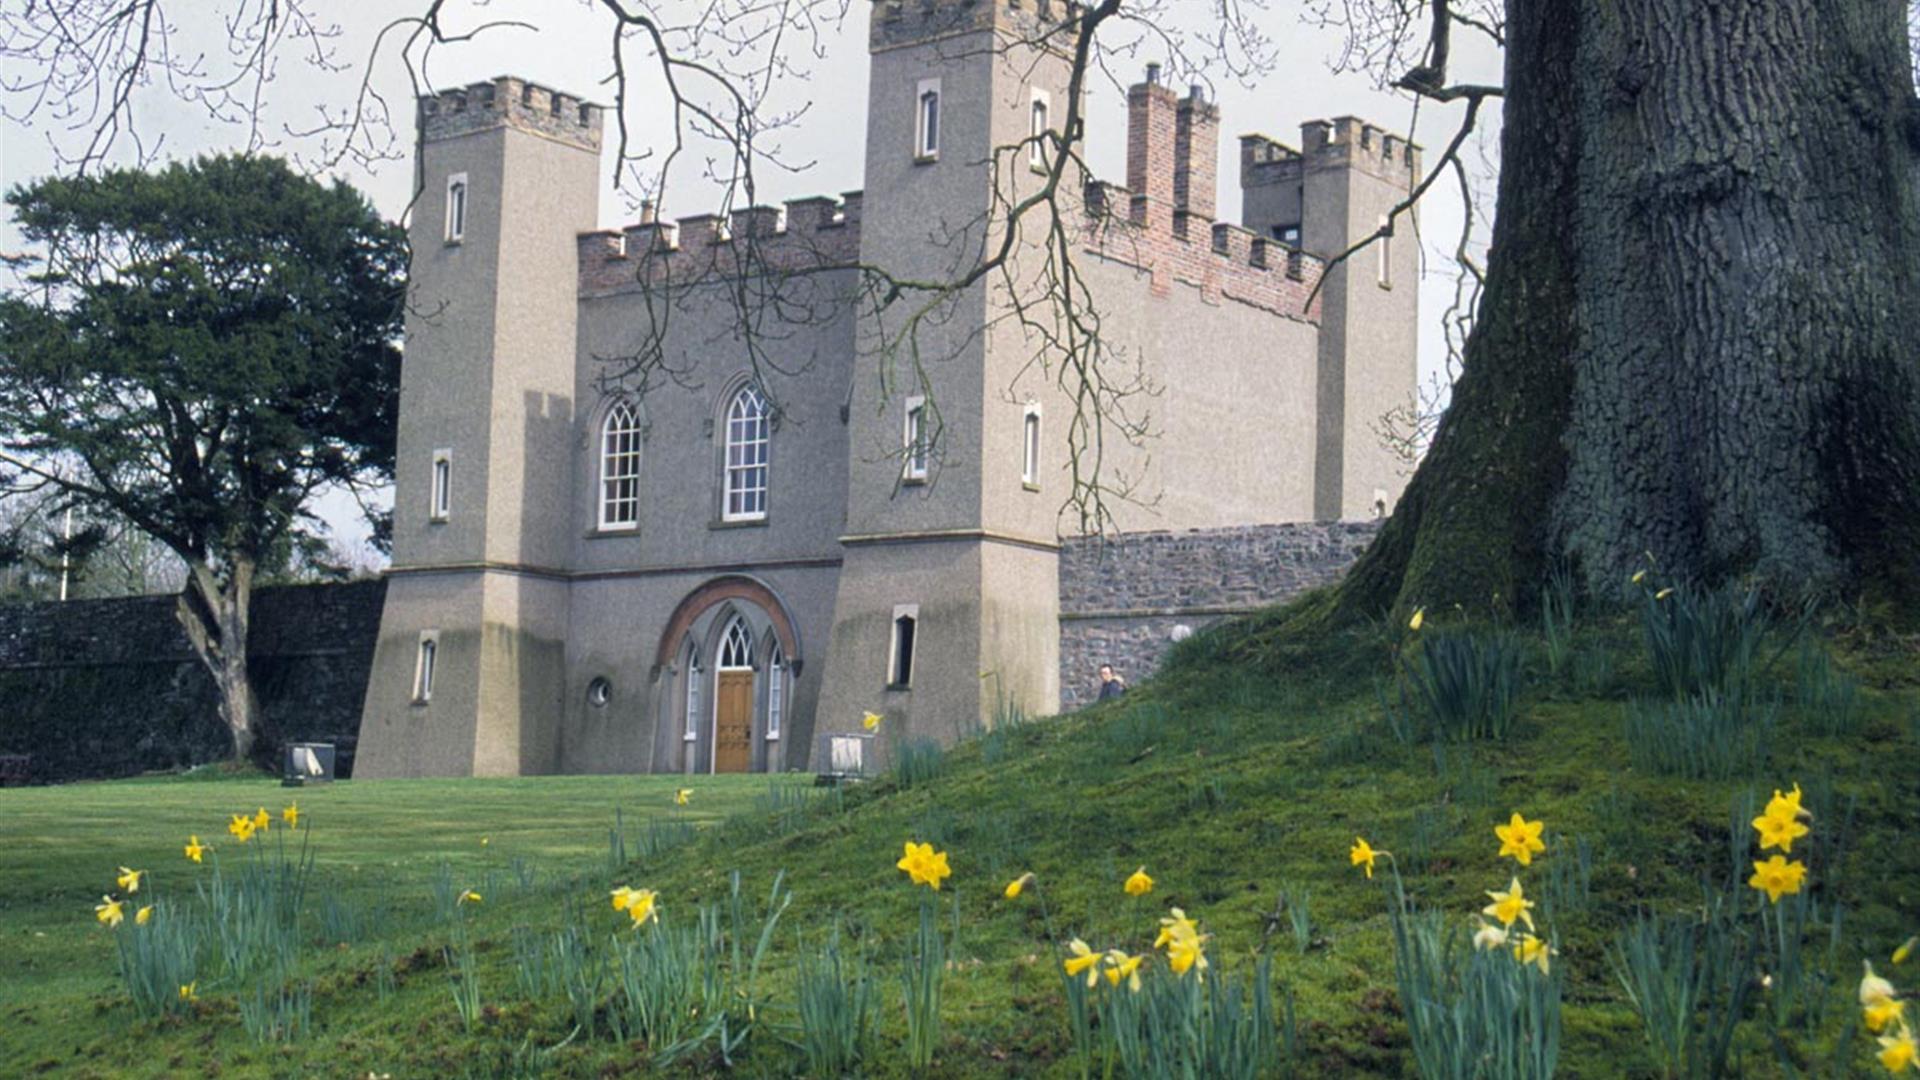 Image is of the Fort with a large tree and daffodils in the foreground